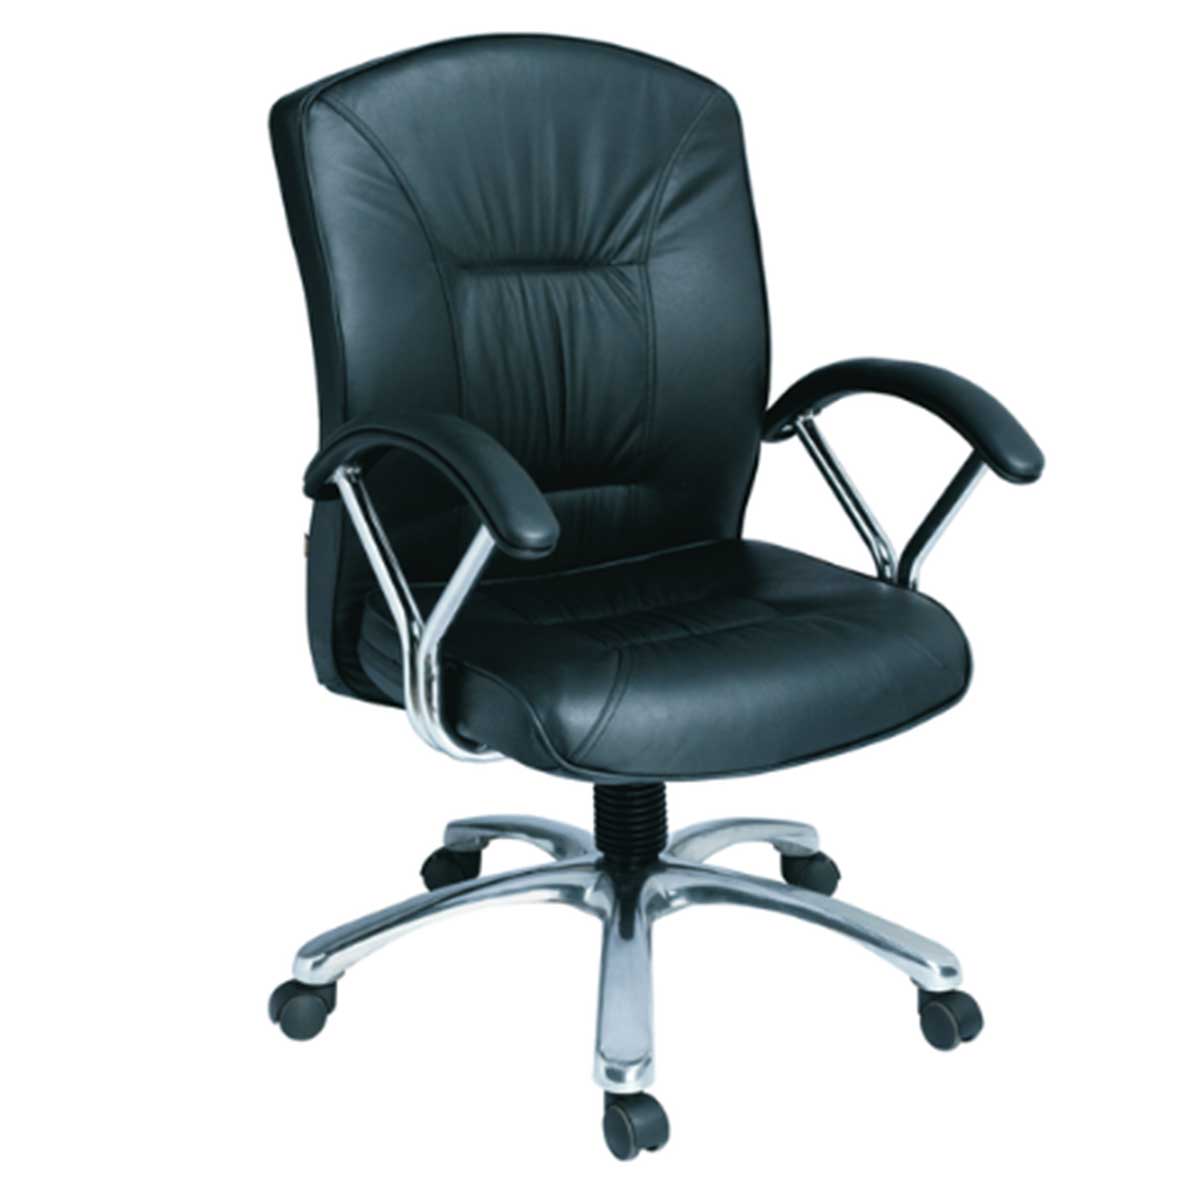 Executive Chair Manufacturers, Suppliers in Dwarka Sector 15